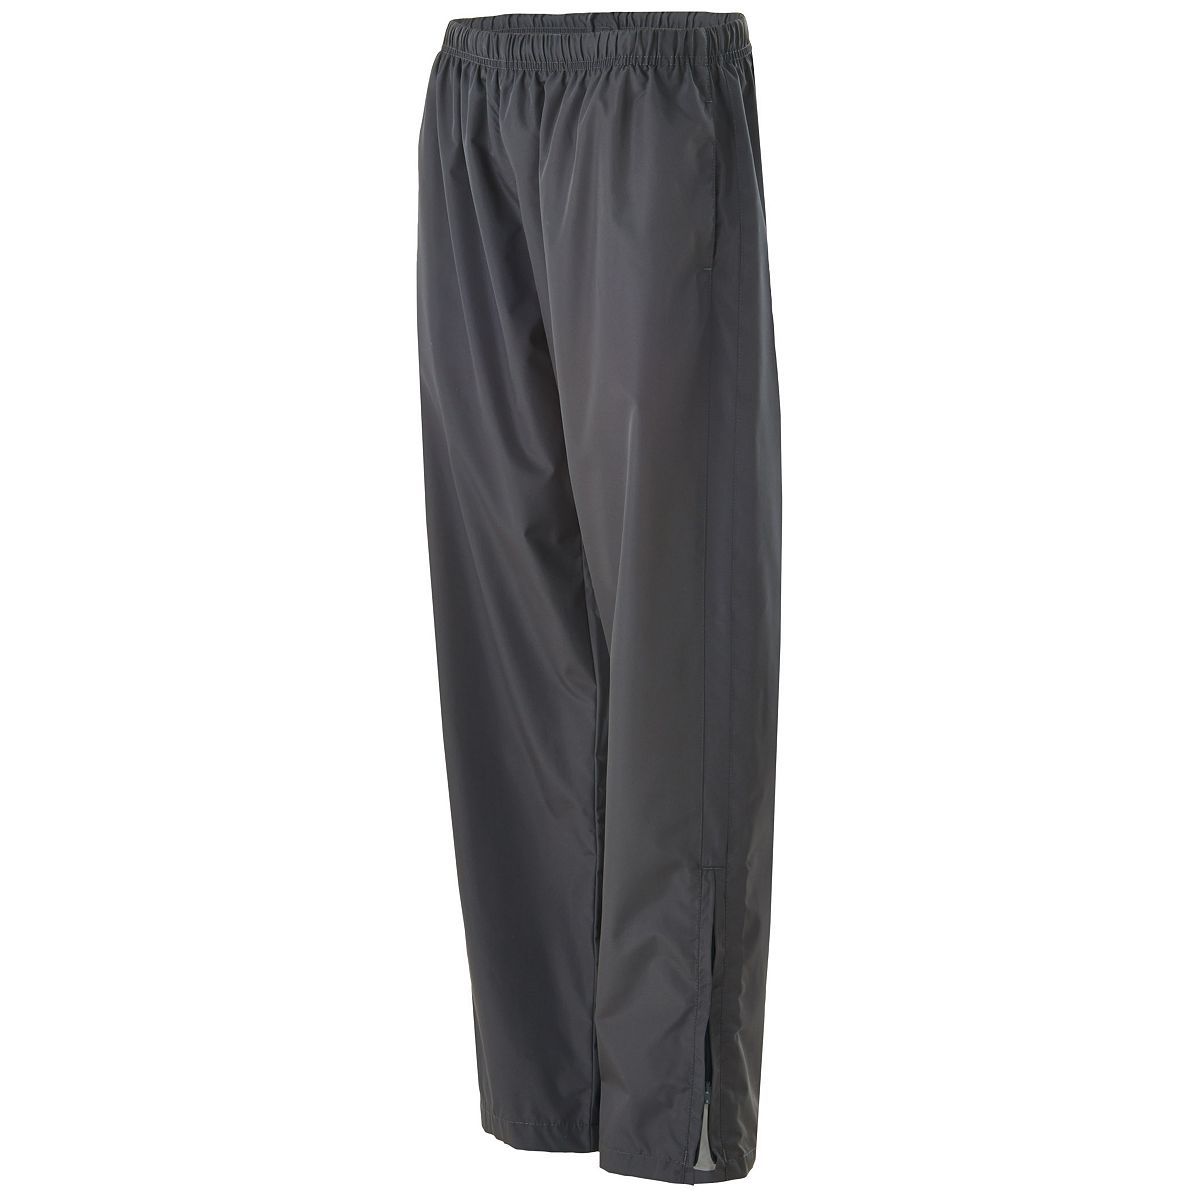 Holloway Sable Pant in Carbon/Carbon  -Part of the Adult, Adult-Pants, Pants, Holloway product lines at KanaleyCreations.com